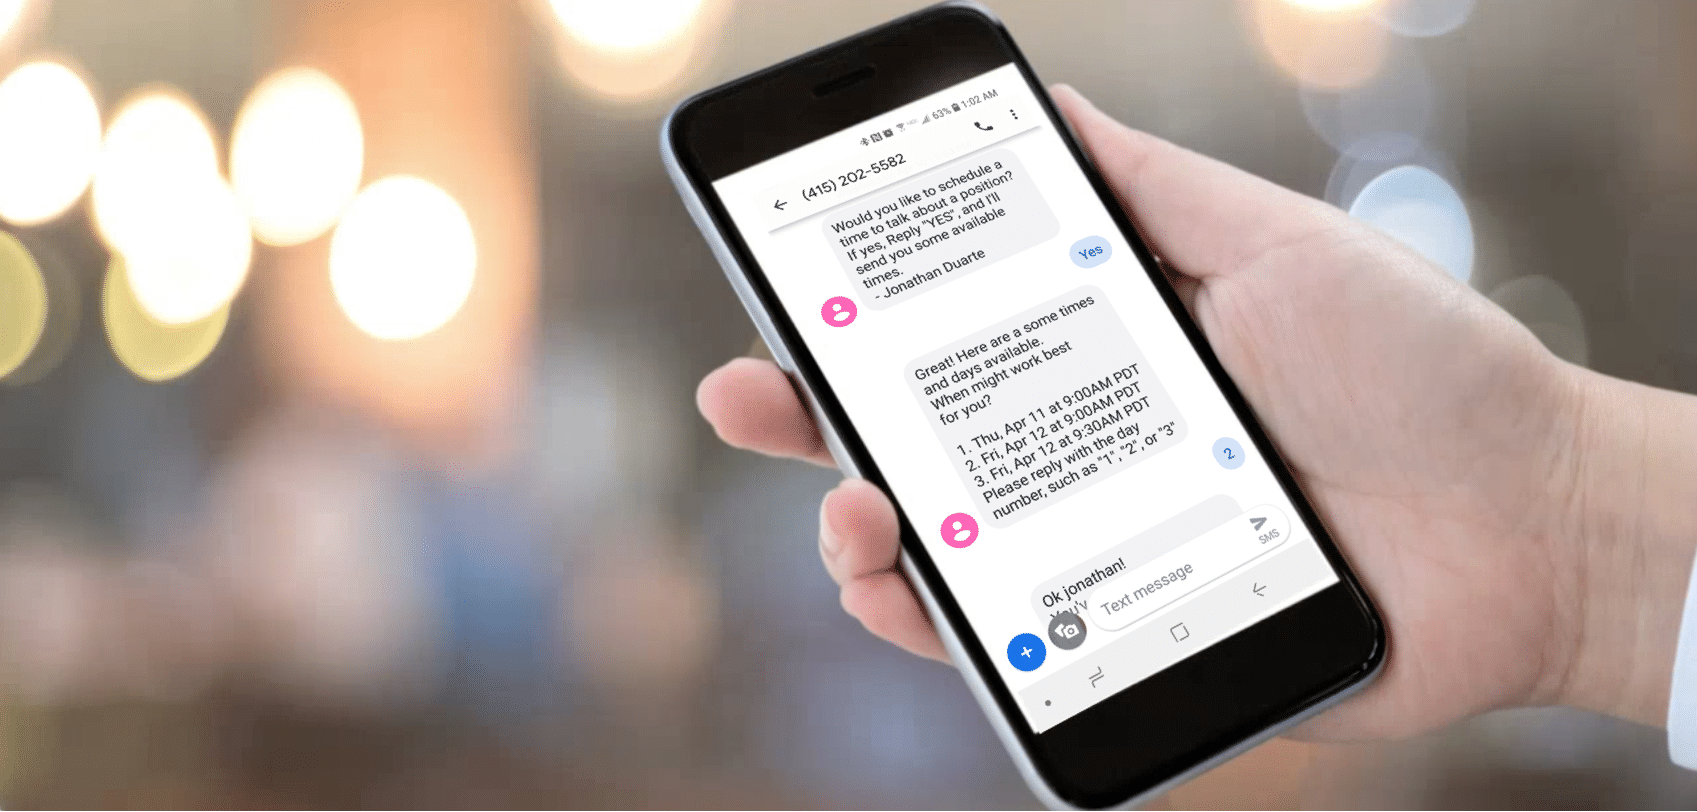 Automated Scheduling with Text Messaging